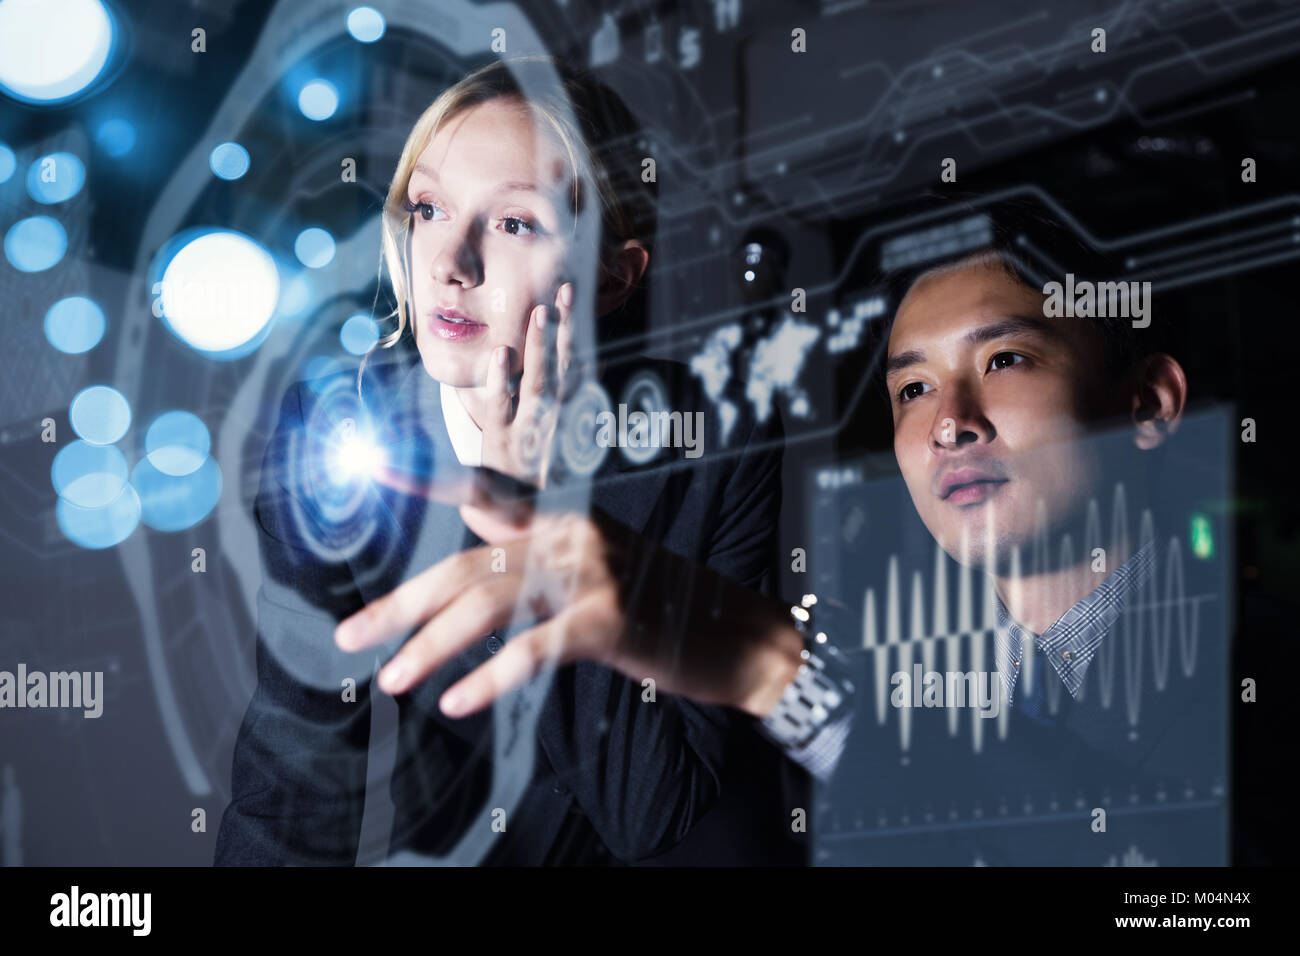 Two business persons in front of futuristic display. Social networking concept. Stock Photo